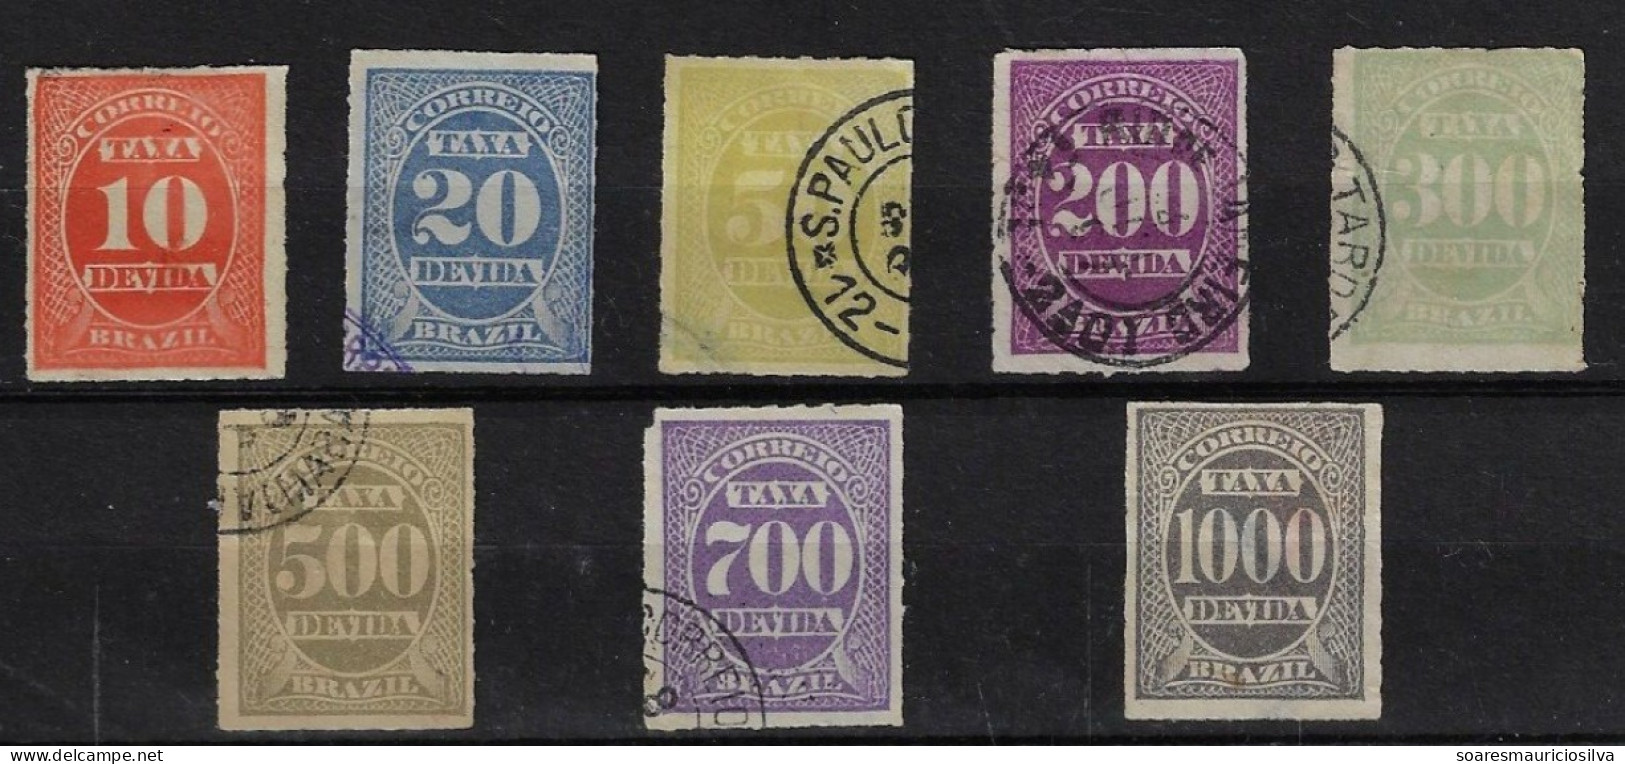 Brazil 1890 Complete Series Postage Due American Bank Note Colors Used & Unused Ink Used In These Stamps Fades In Water - Impuestos